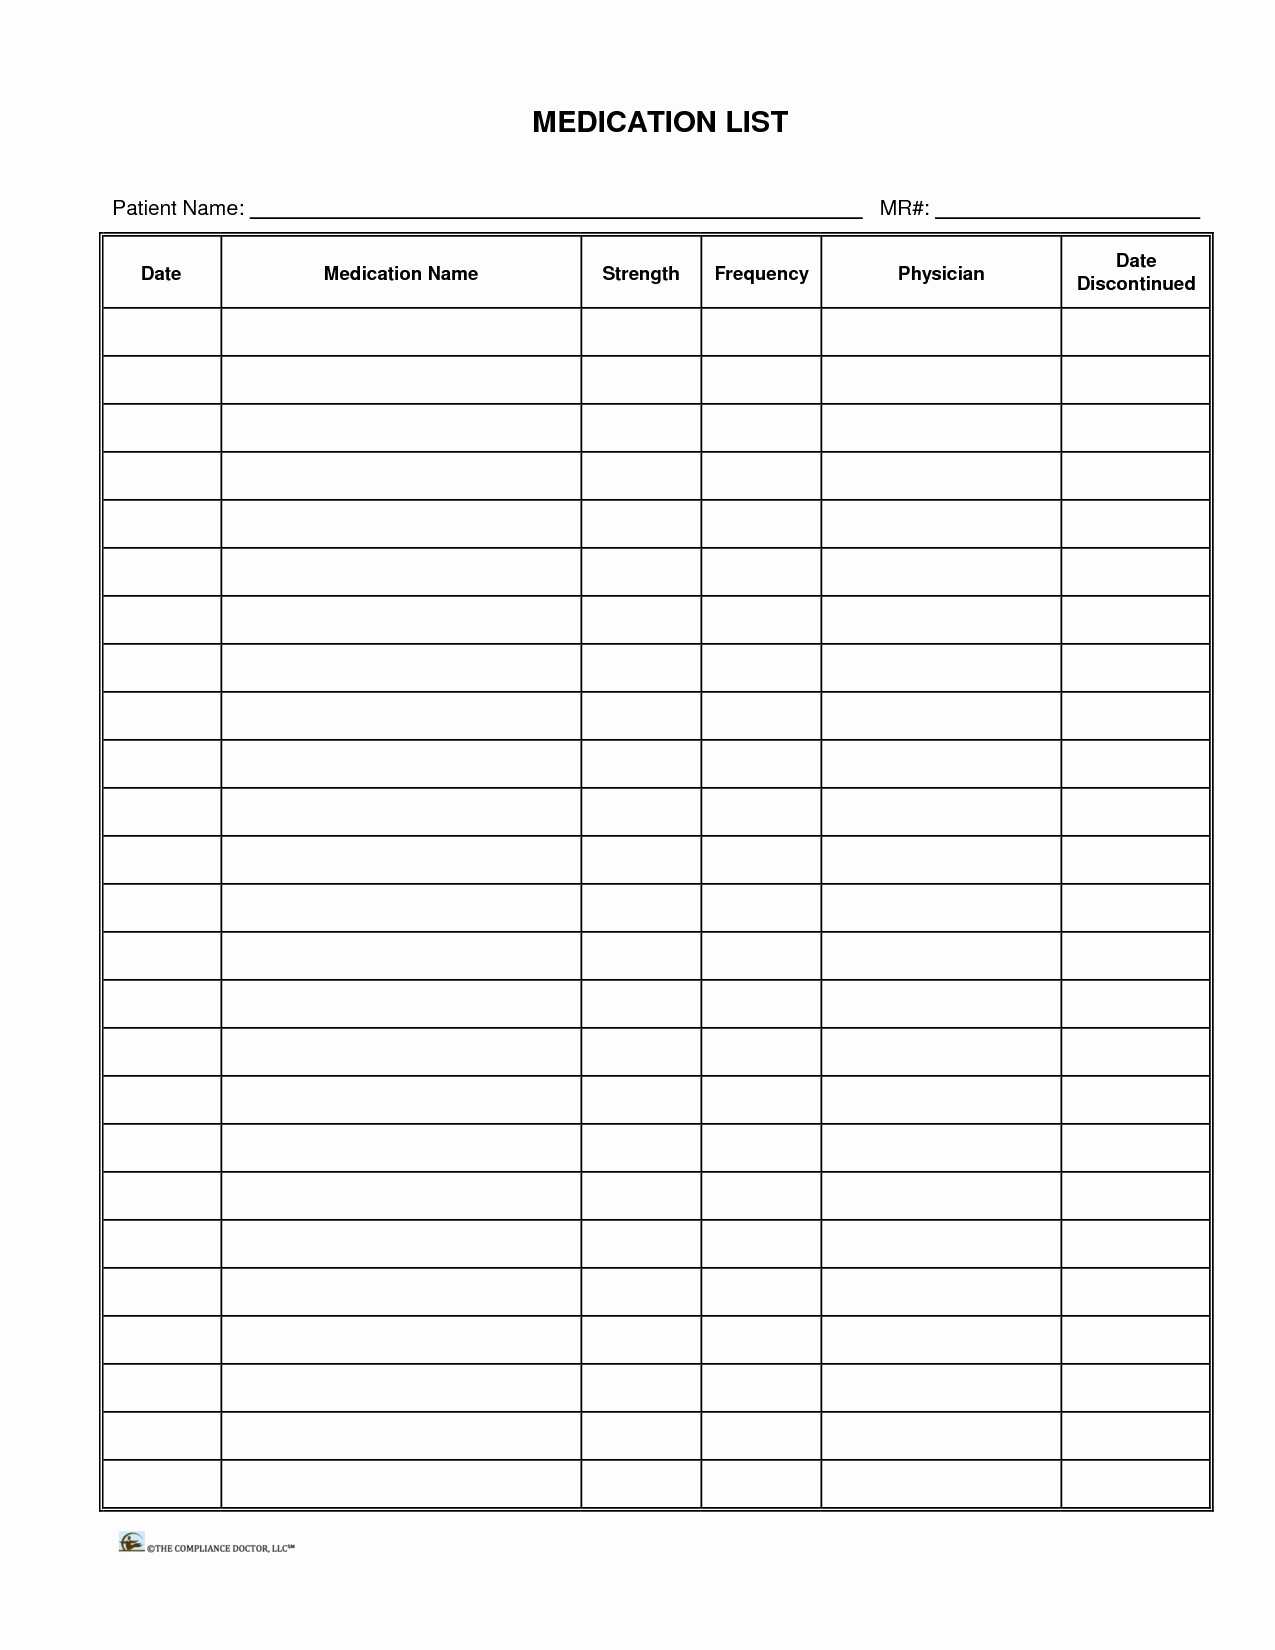 Schedule Worksheet Templates with Spreadsheet for Rental Property Calculator Spreadsheet New Excel